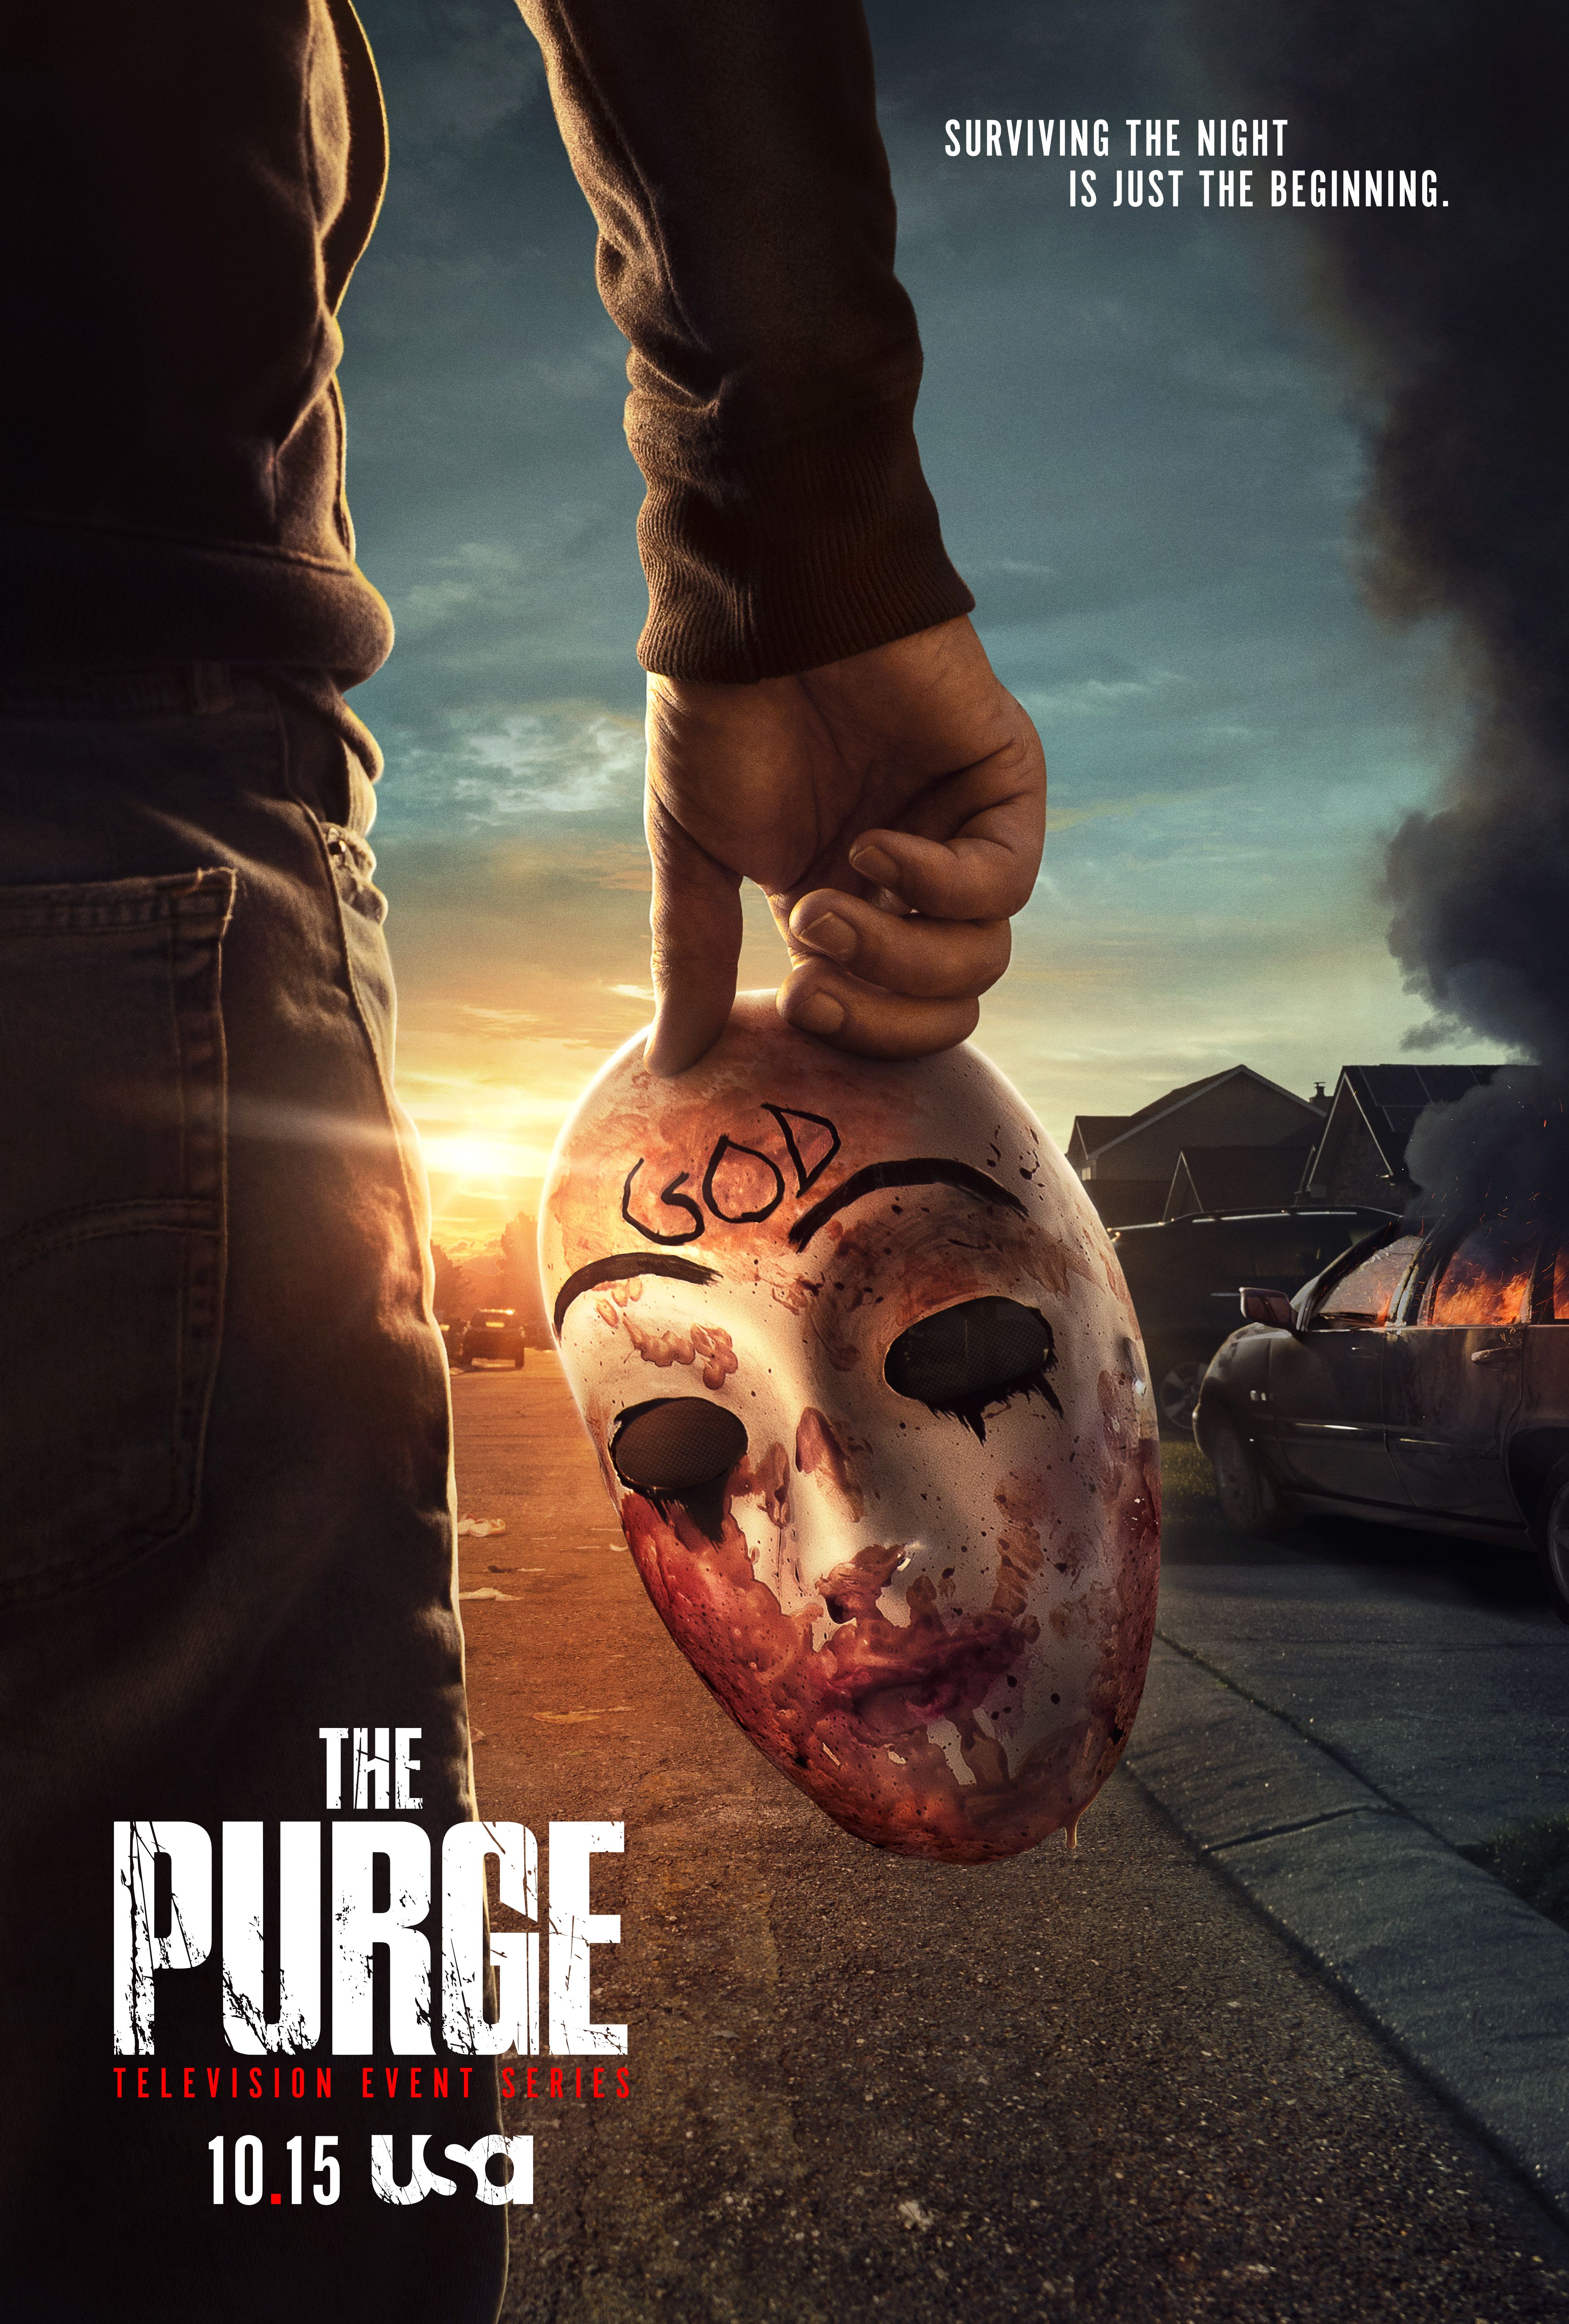 The Purge TV Show Poster